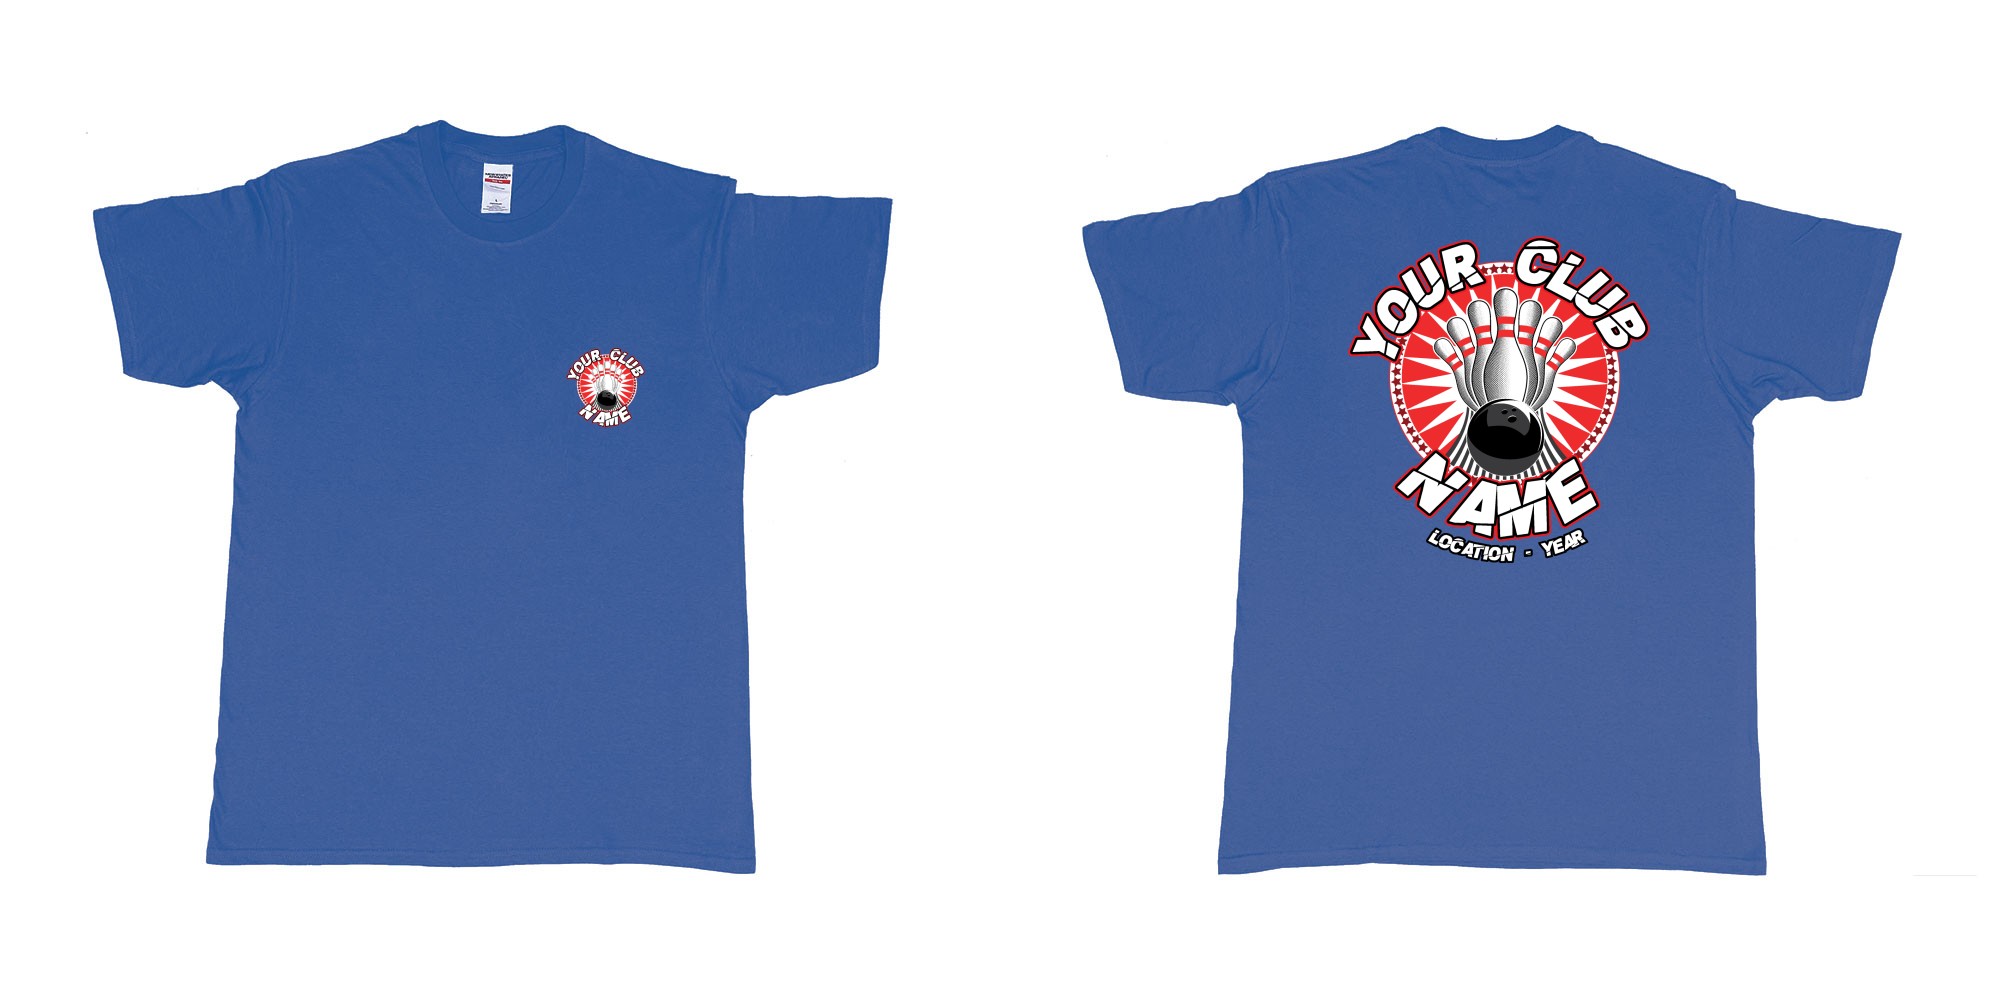 Custom tshirt design TPW strike bowling in fabric color royal-blue choice your own text made in Bali by The Pirate Way